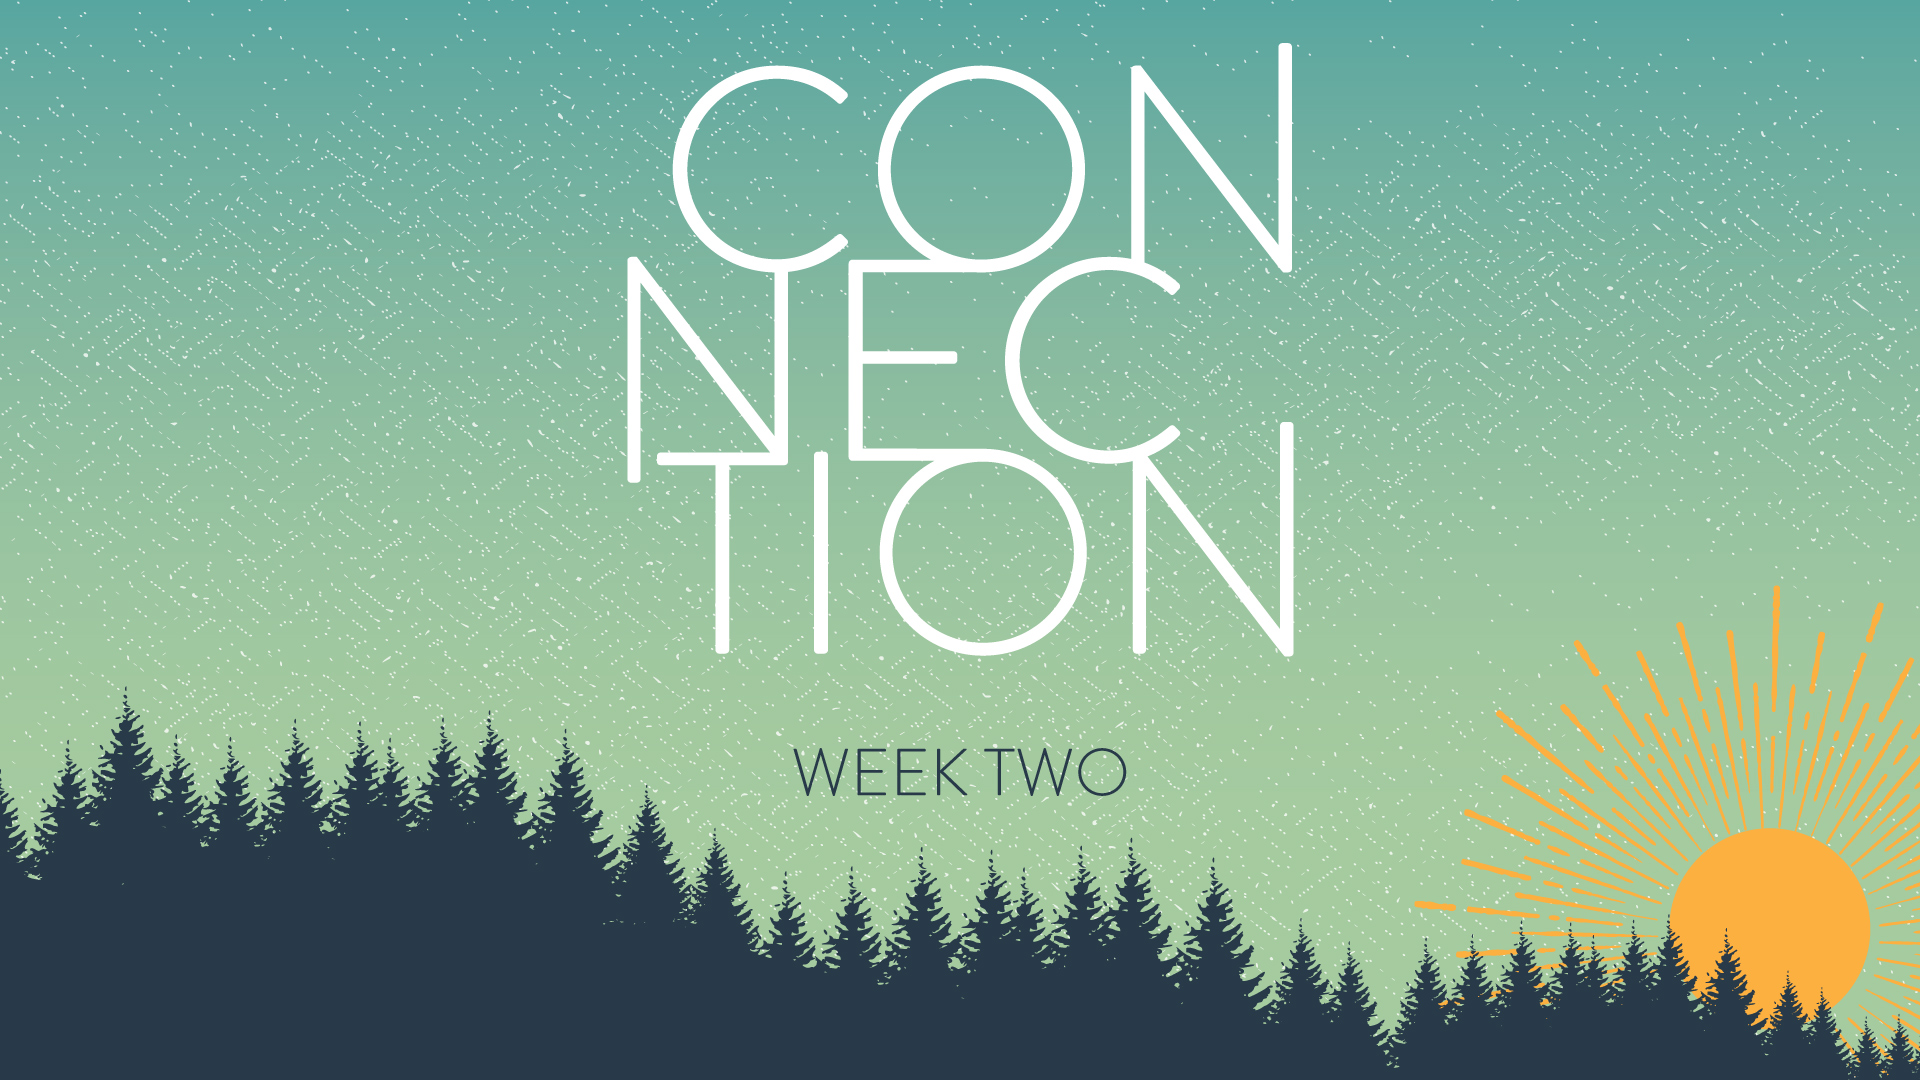 Connection - Week Two